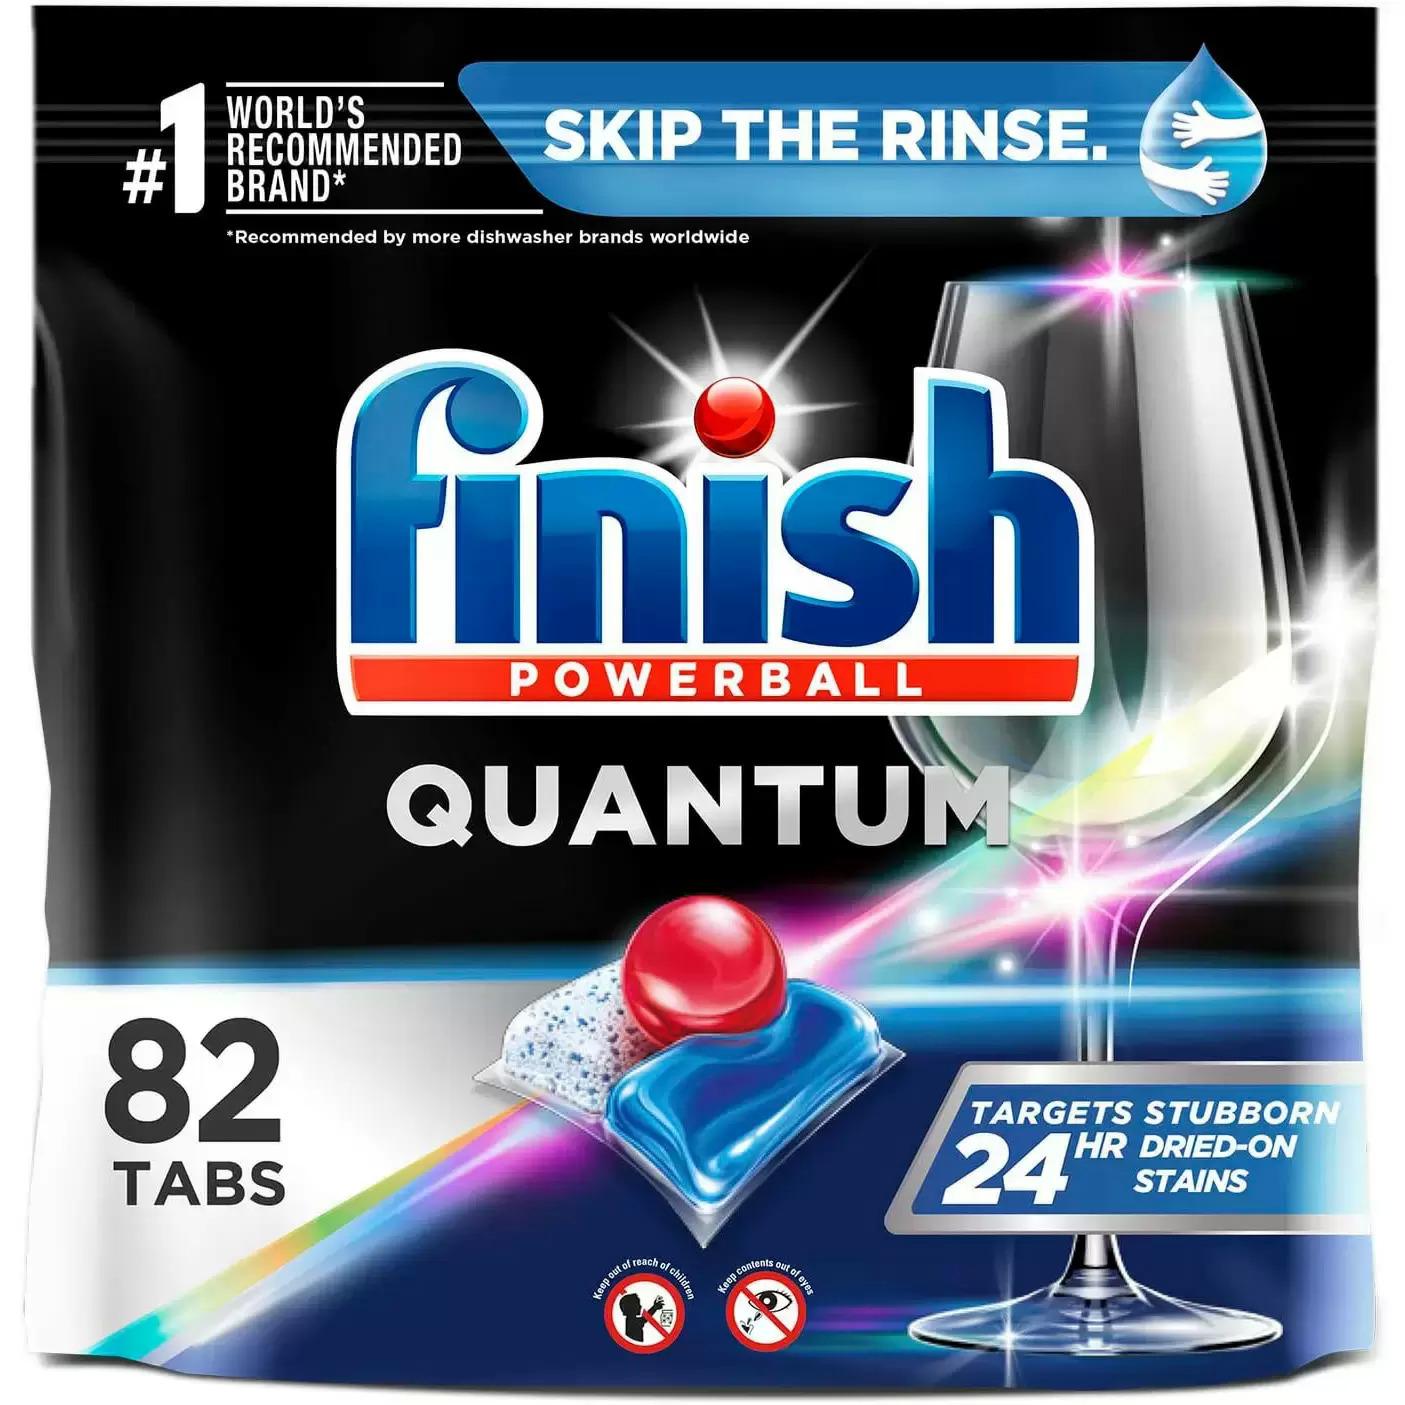 Finish Powerball Quantum Dishwasher Detergent Tablets 82 Pack for $13.93